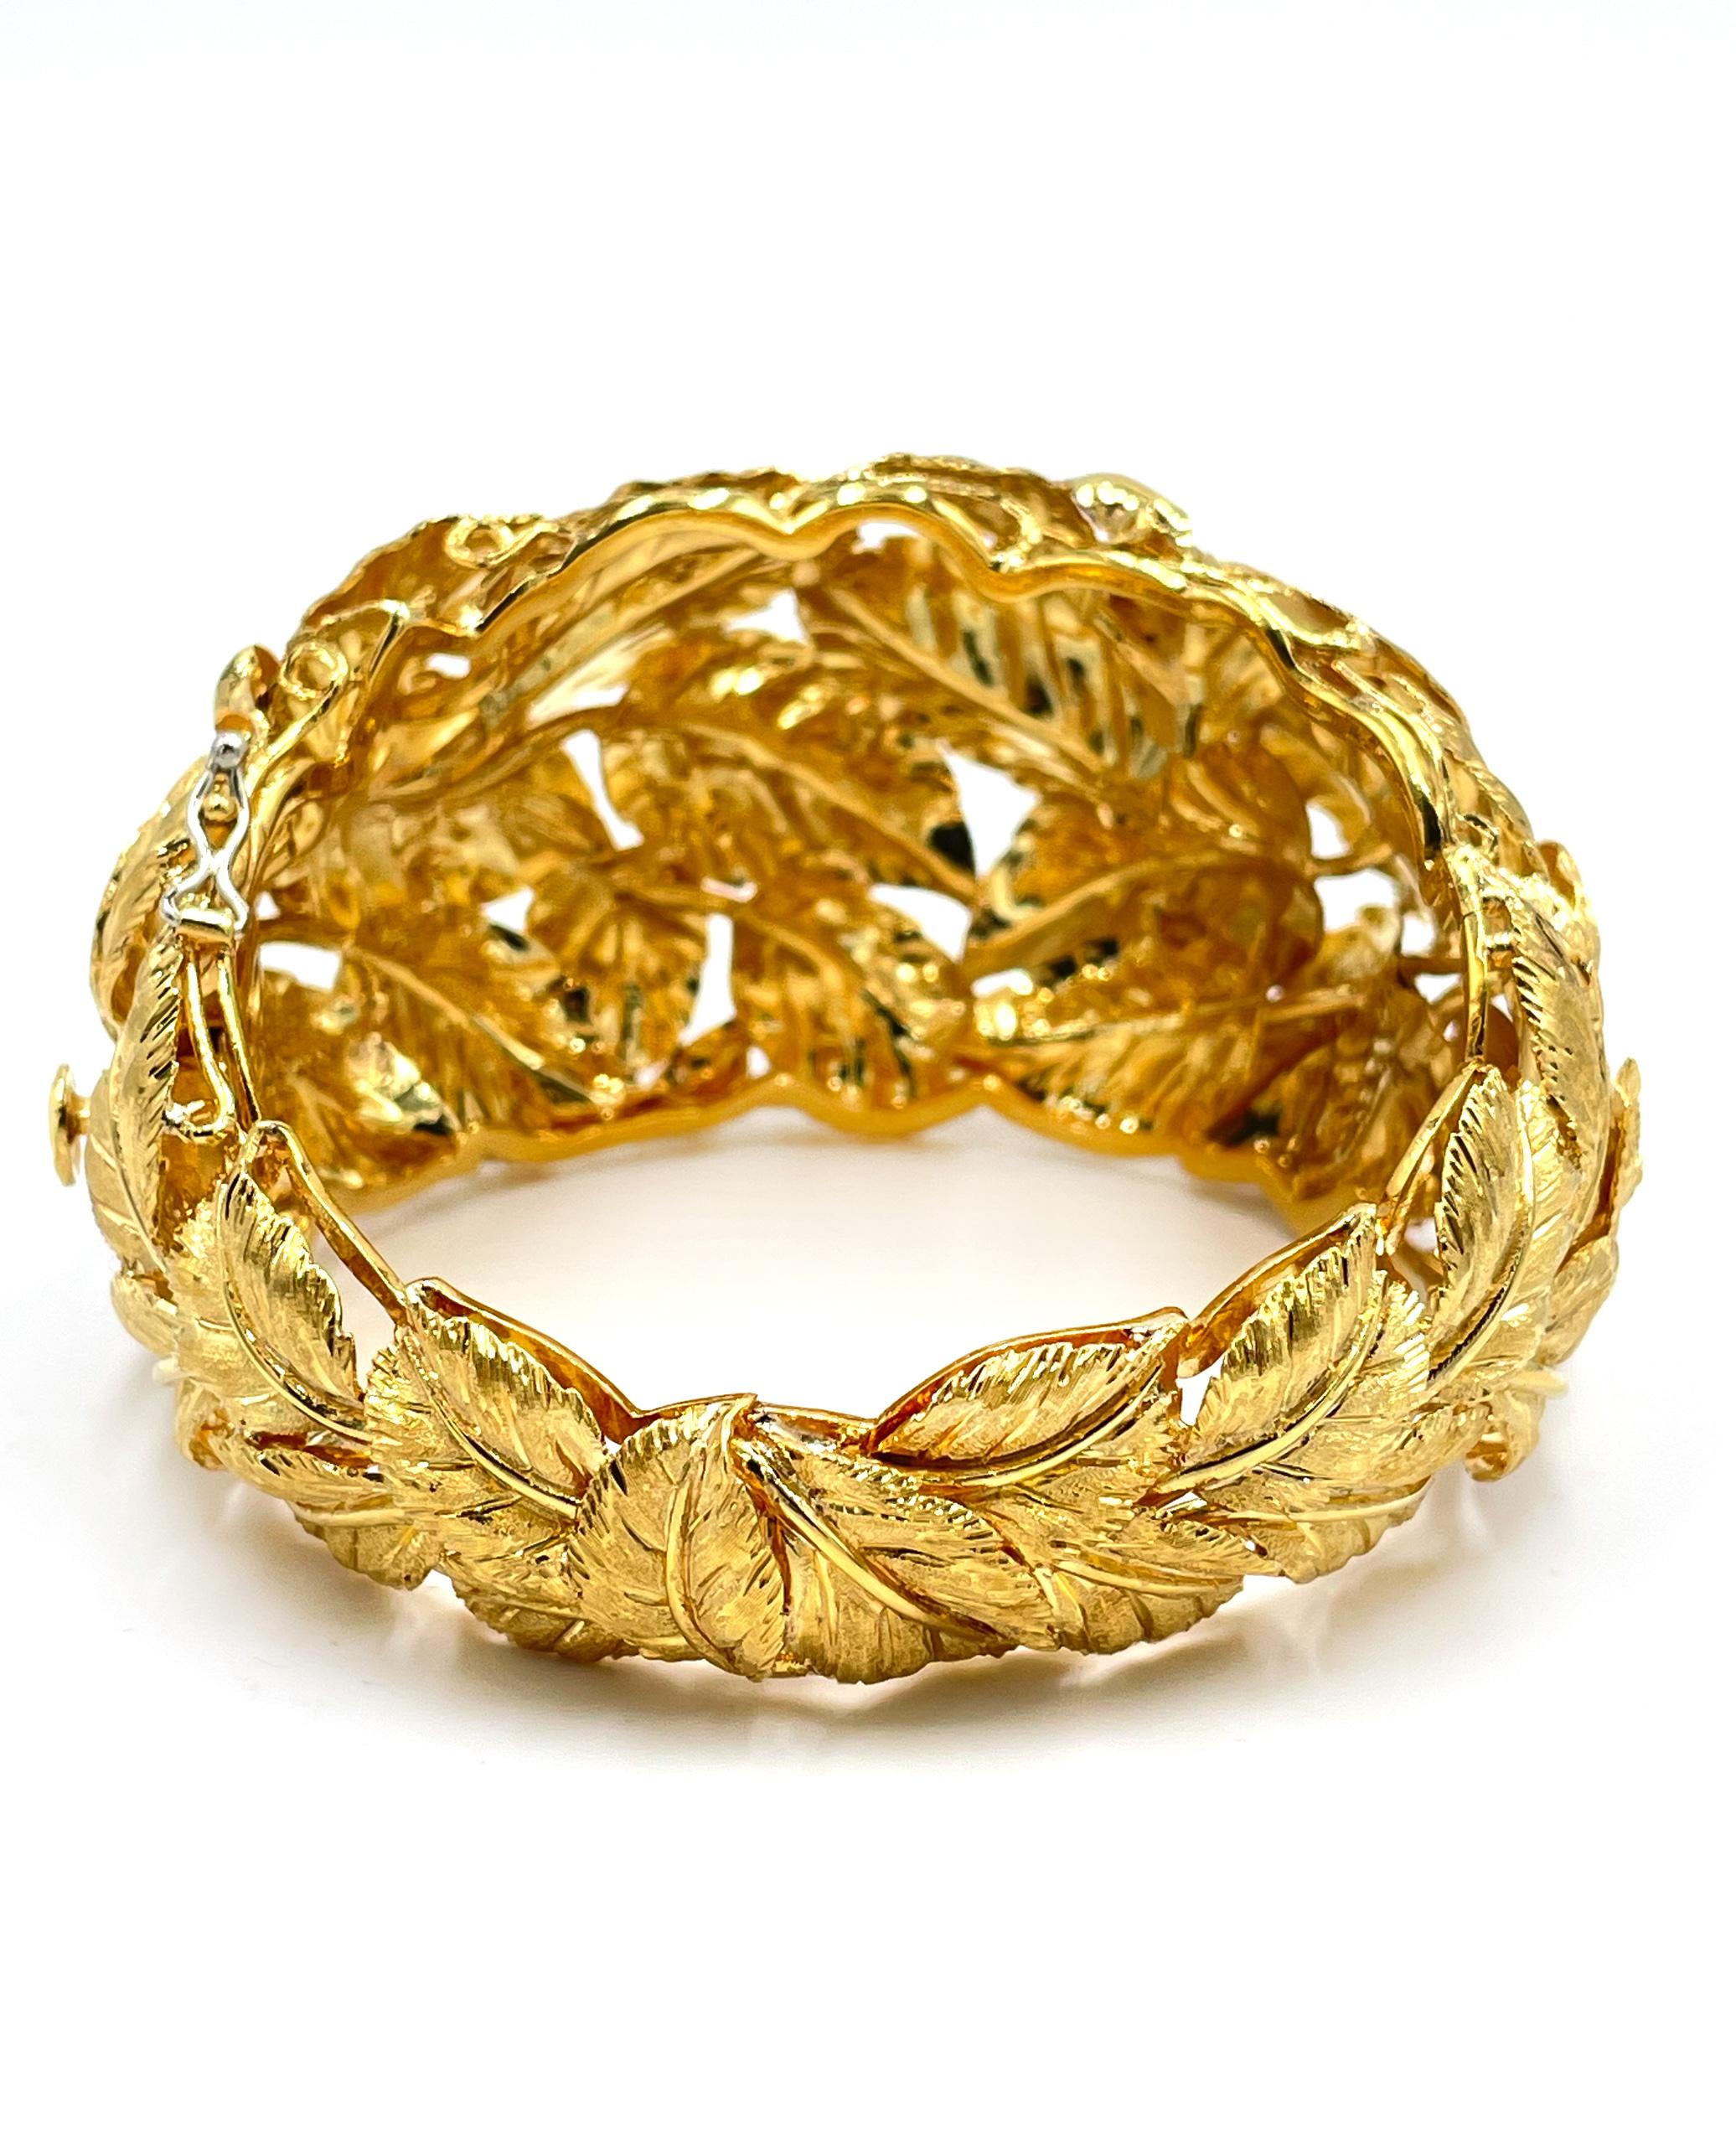 Women's Preowned Vintage 18K Yellow Gold Italian Leaf Wide Statement Bracelet For Sale